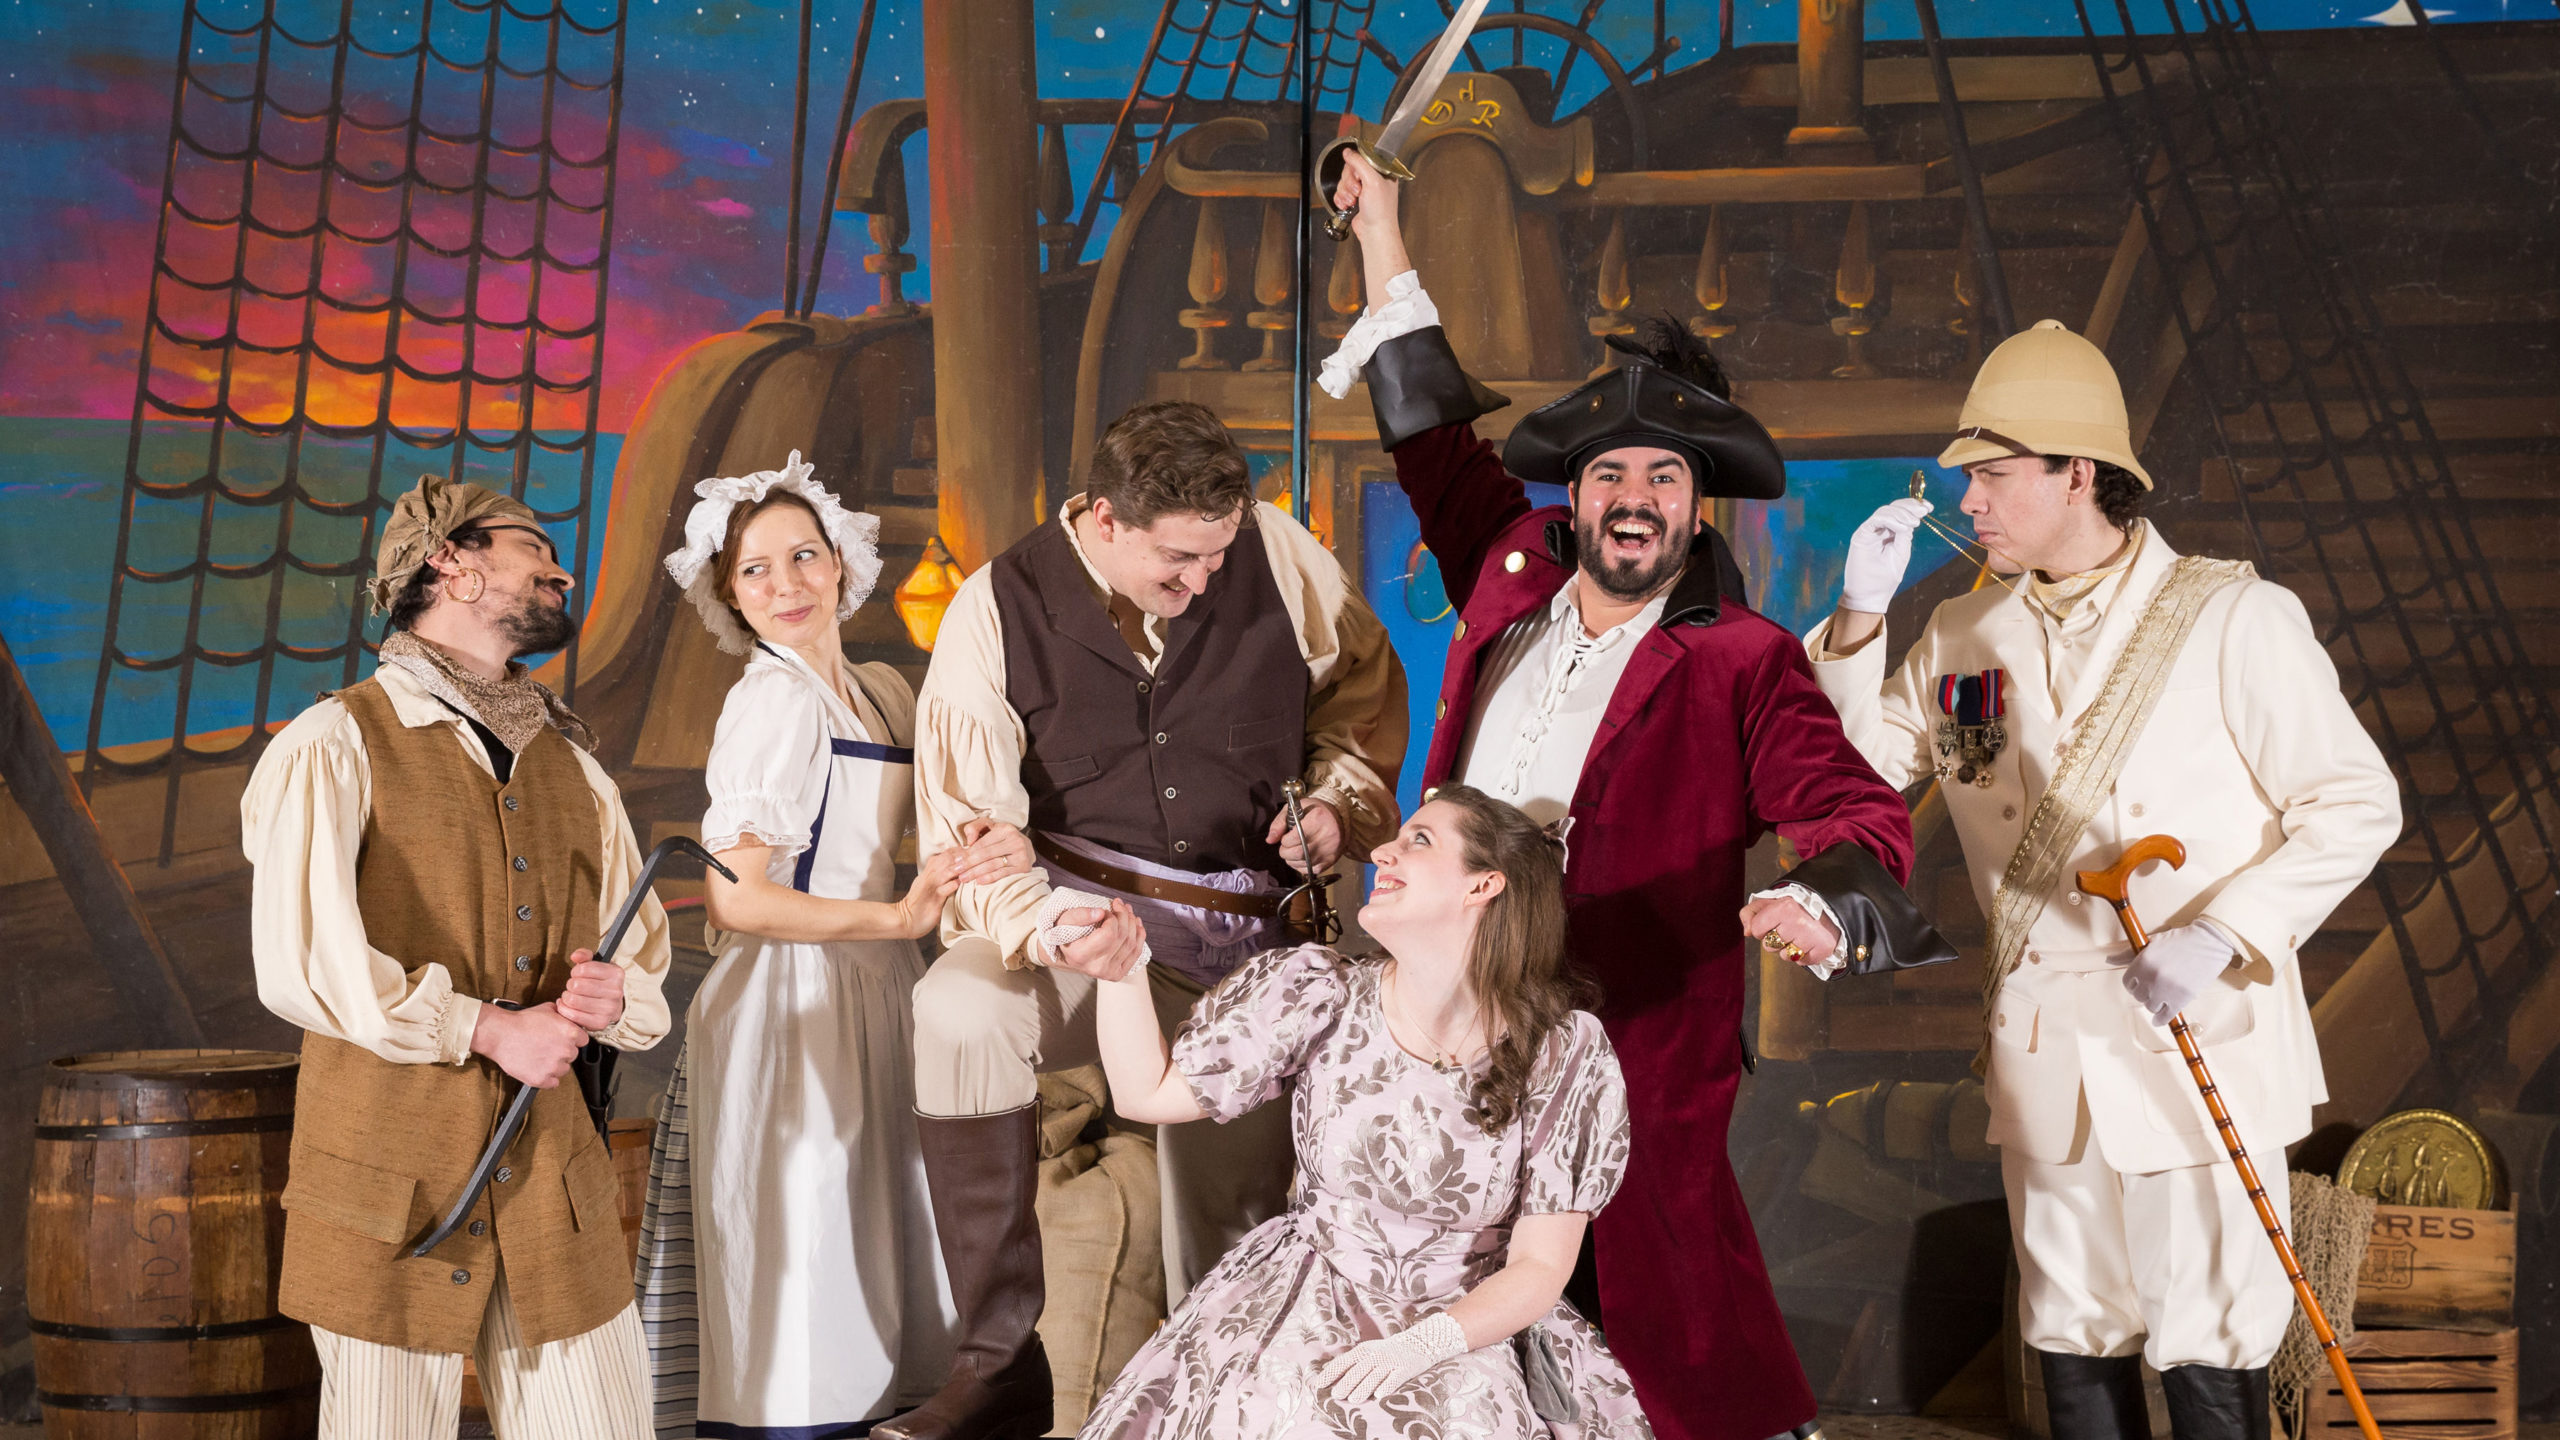 The cast of The Pirates of Penzance poses in front of the ship set